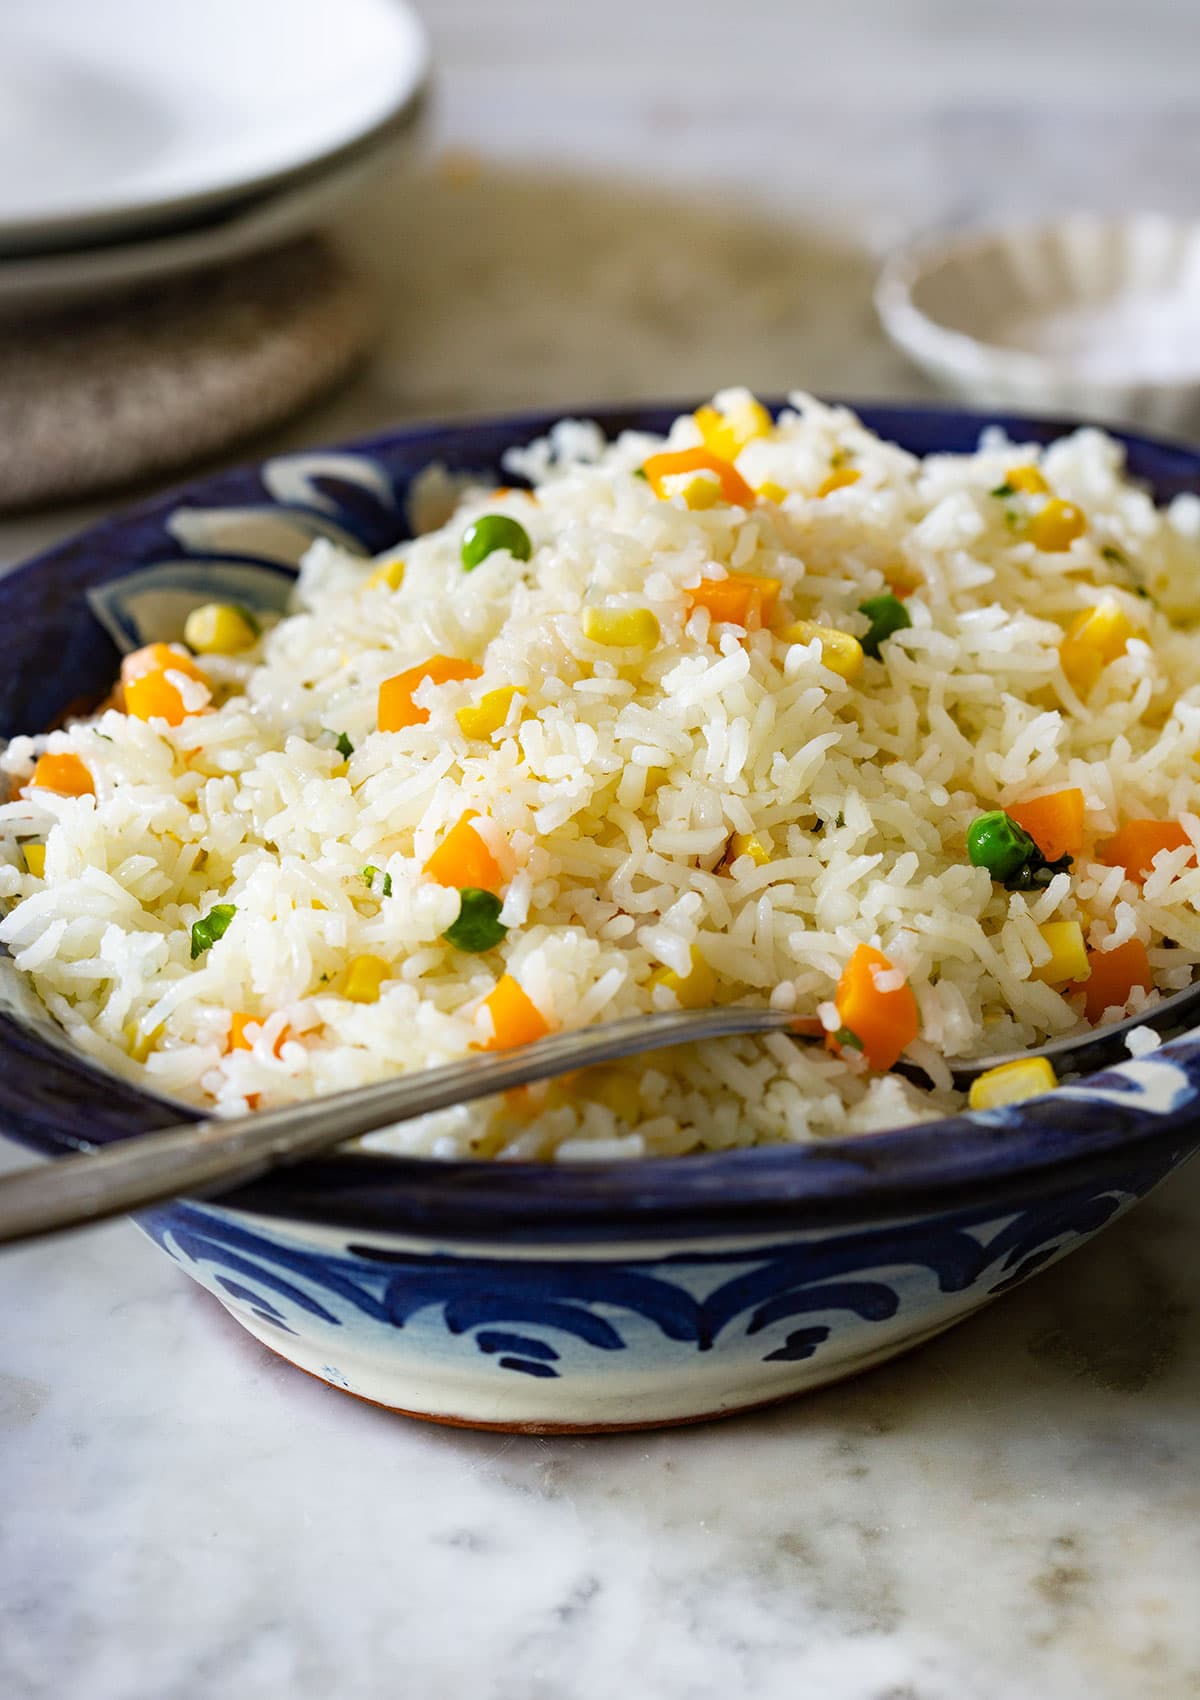 Mexican white rice, also known as arroz blanco or arroz primavera, served on a clay bowl.